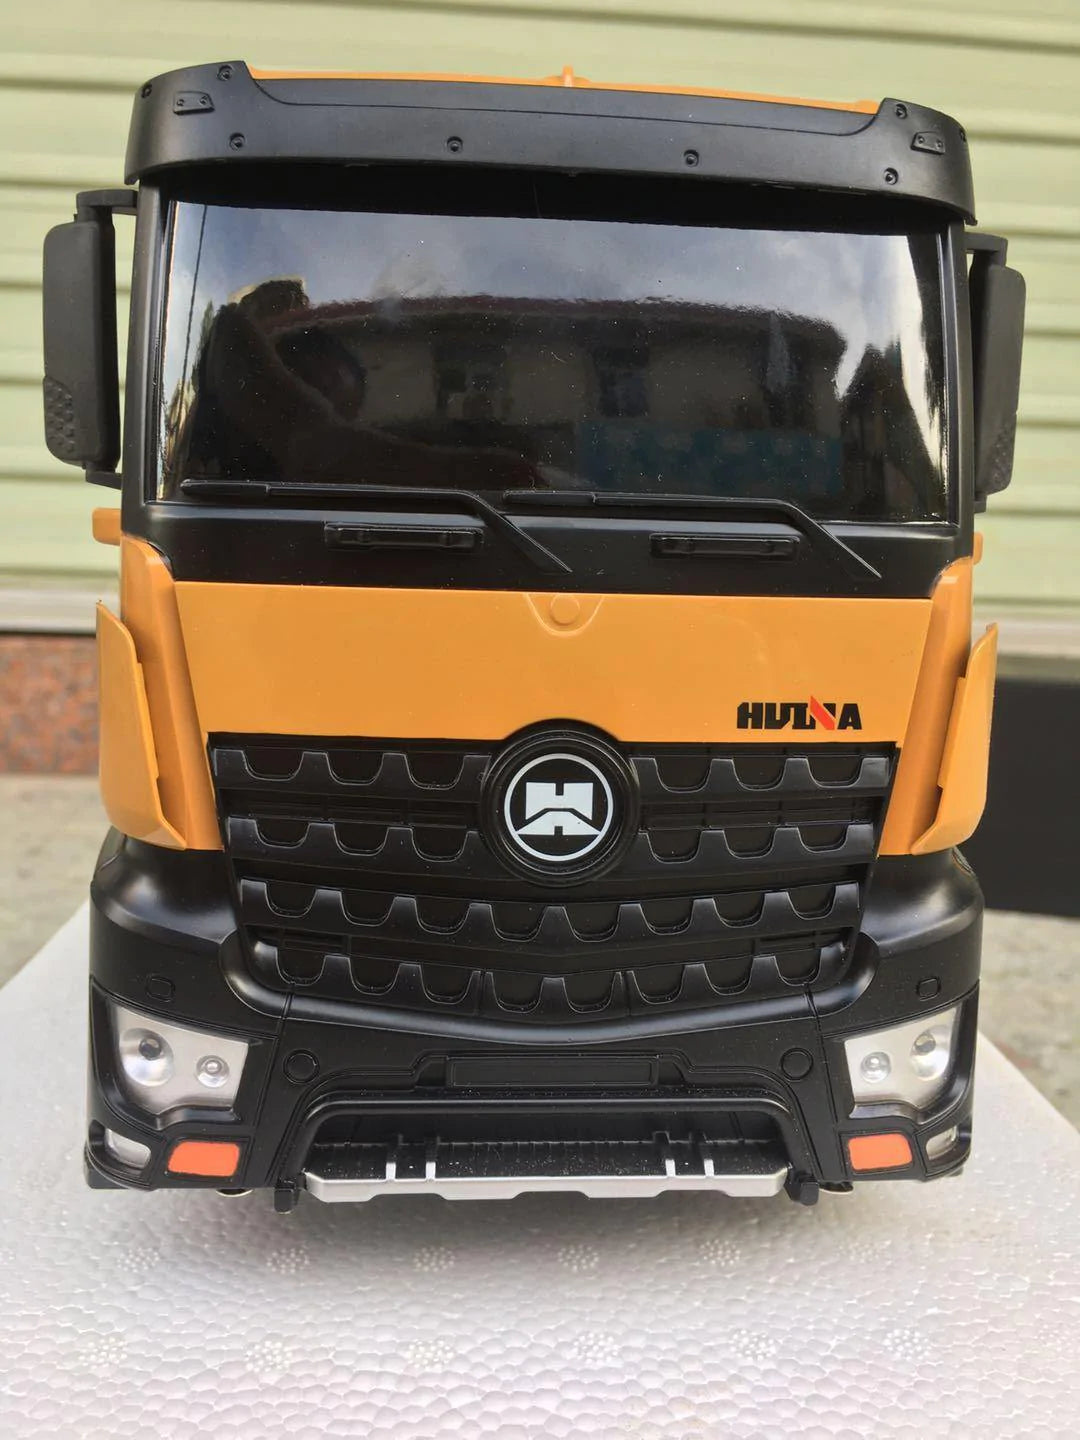 Rechargeable Big Dump Truck For Kid’s Simulation - Buy Confidently with Smart Sales Australia